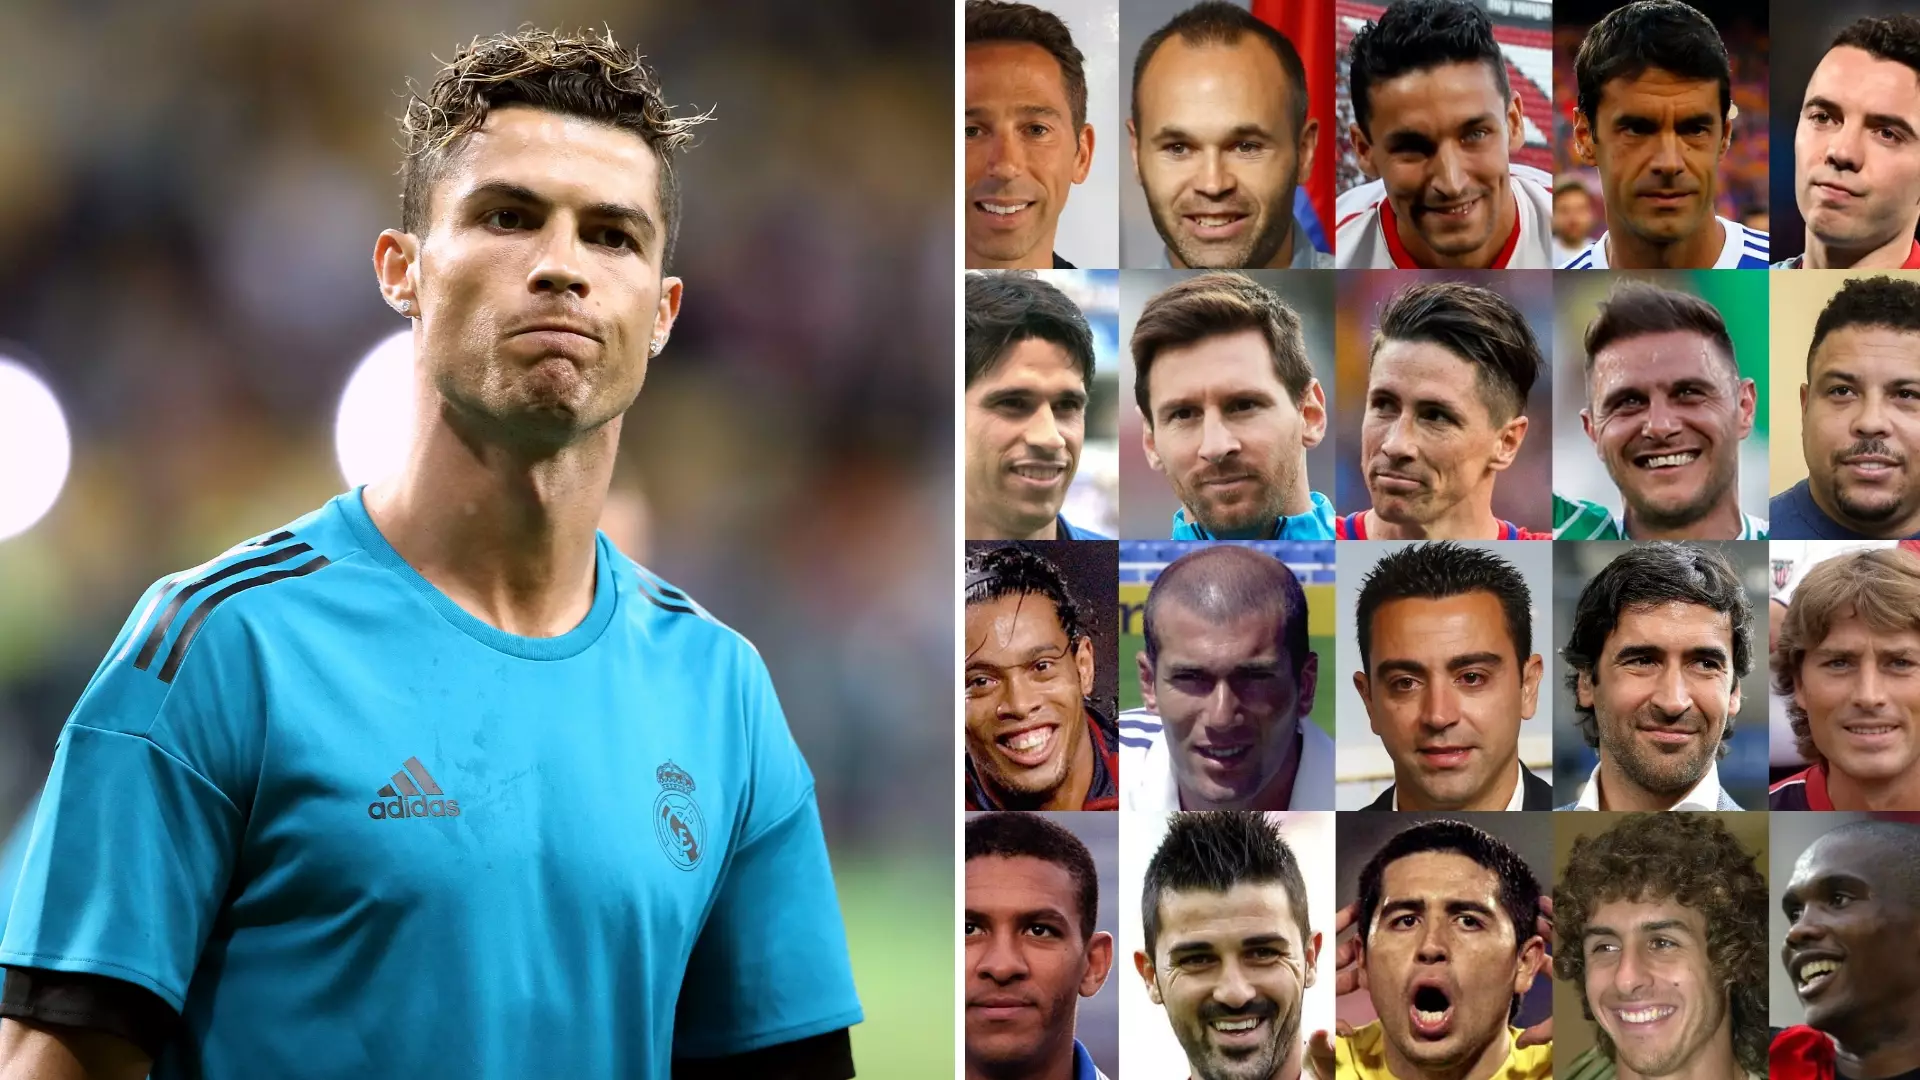 La Liga Left Cristiano Ronaldo Out Of Post Asking Fans To 'Choose Their Favourite Legend'